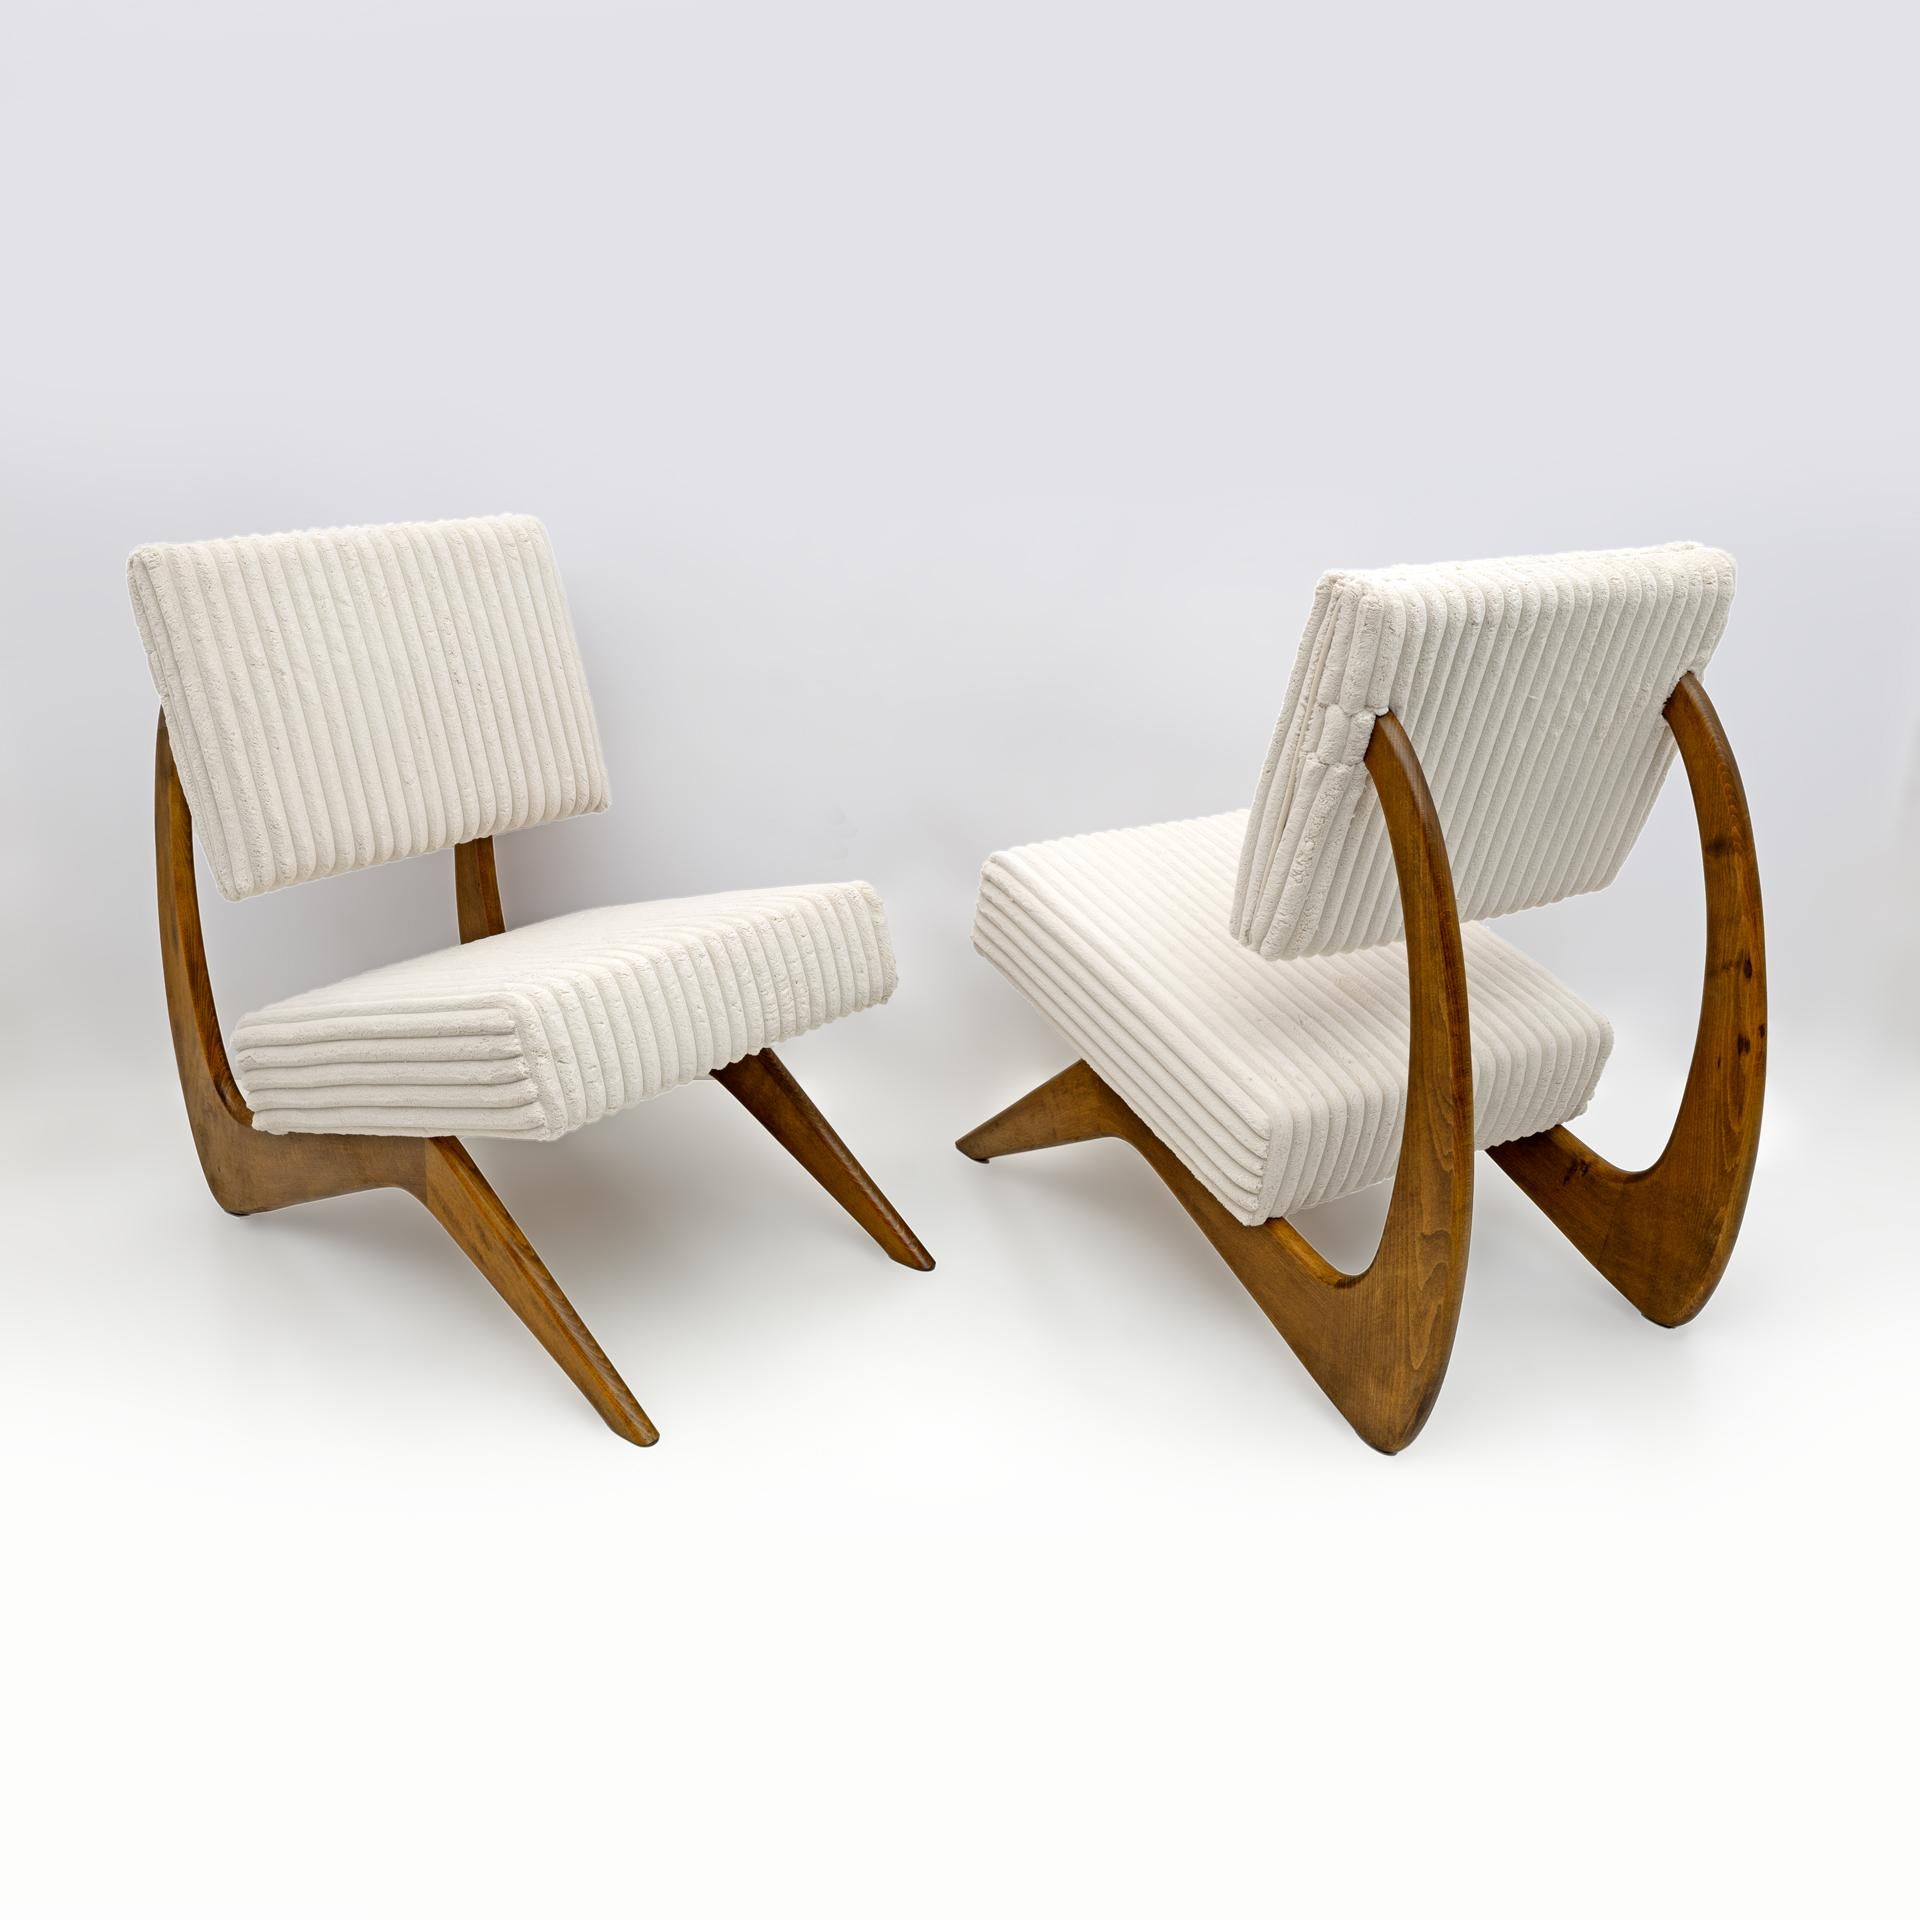 American Pair of Adrian Pearsall Midcentury Walnut Lounge Chairs for Craft Associates For Sale